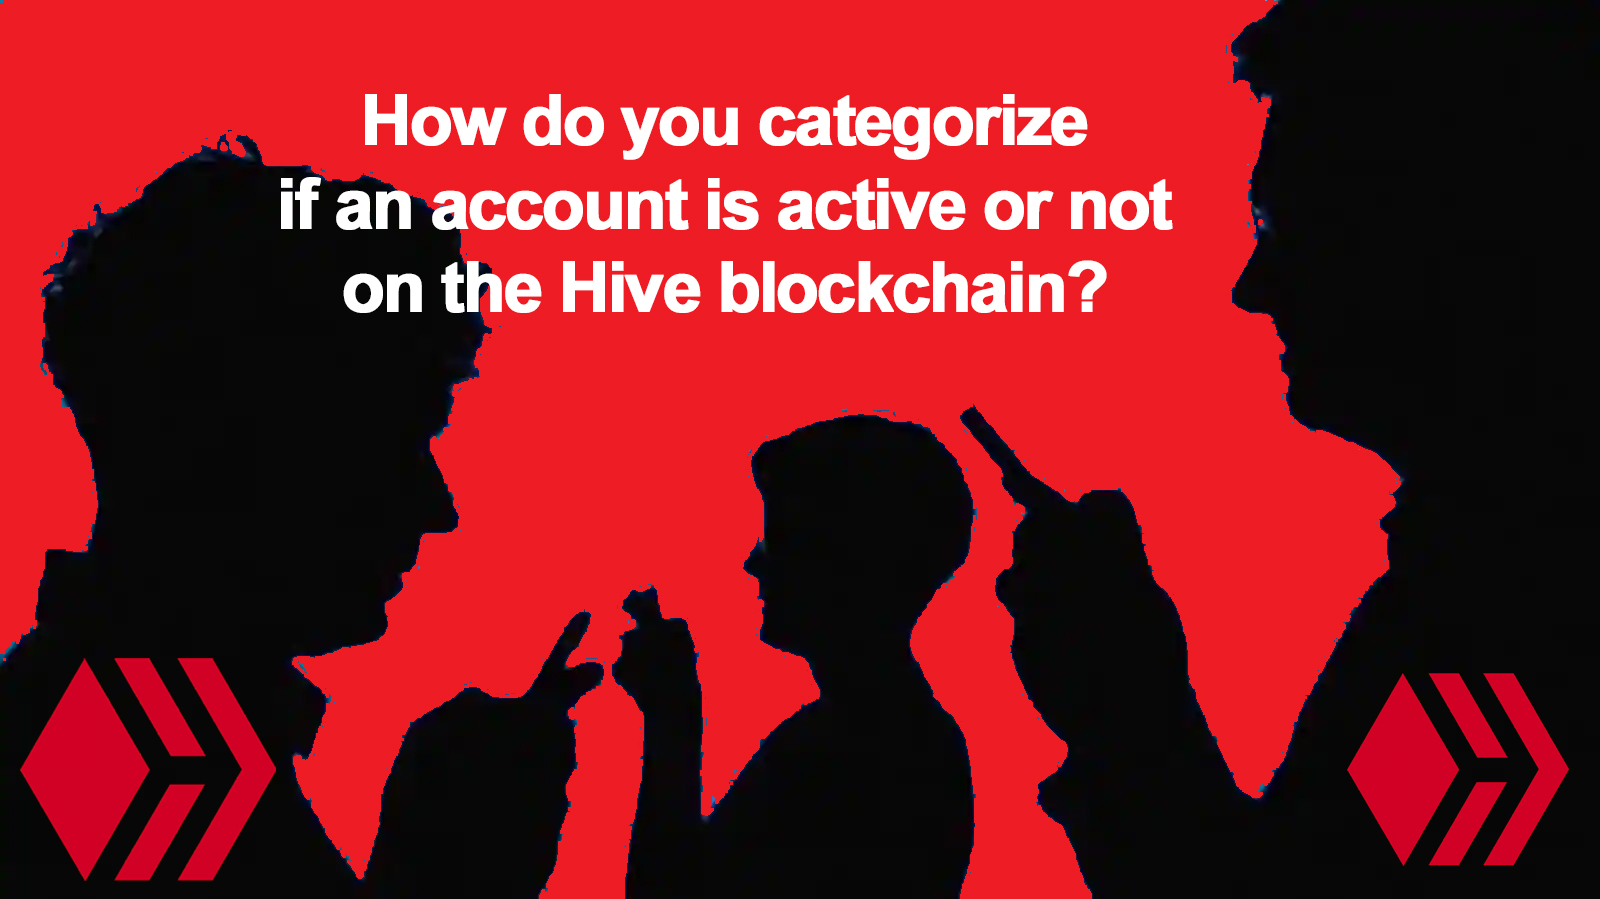 @behiver/how-do-you-categorize-if-an-account-is-active-or-not-on-the-hive-blockchain